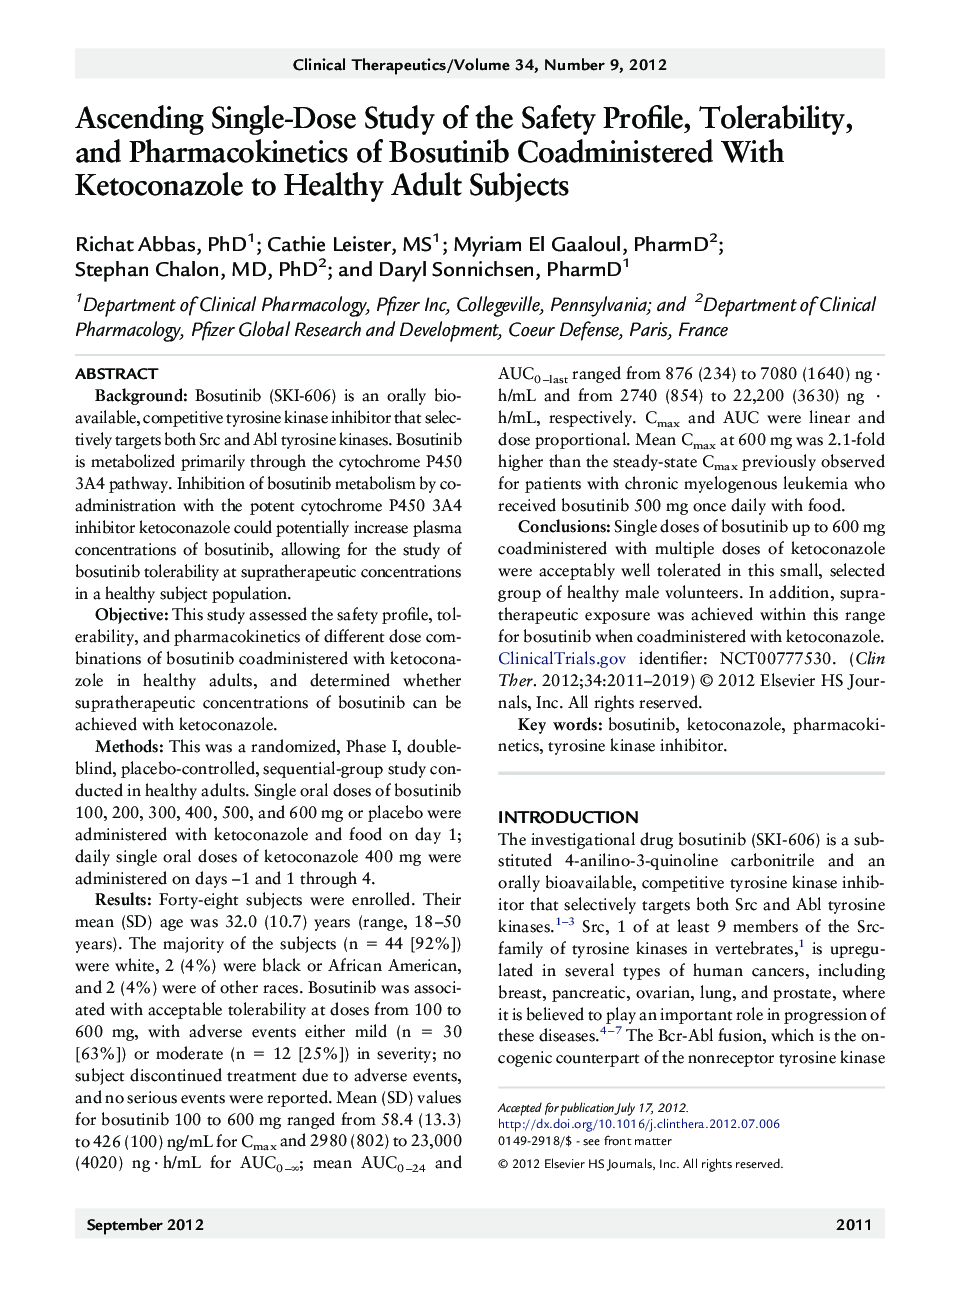 Ascending Single-Dose Study of the Safety Profile, Tolerability, and Pharmacokinetics of Bosutinib Coadministered With Ketoconazole to Healthy Adult Subjects